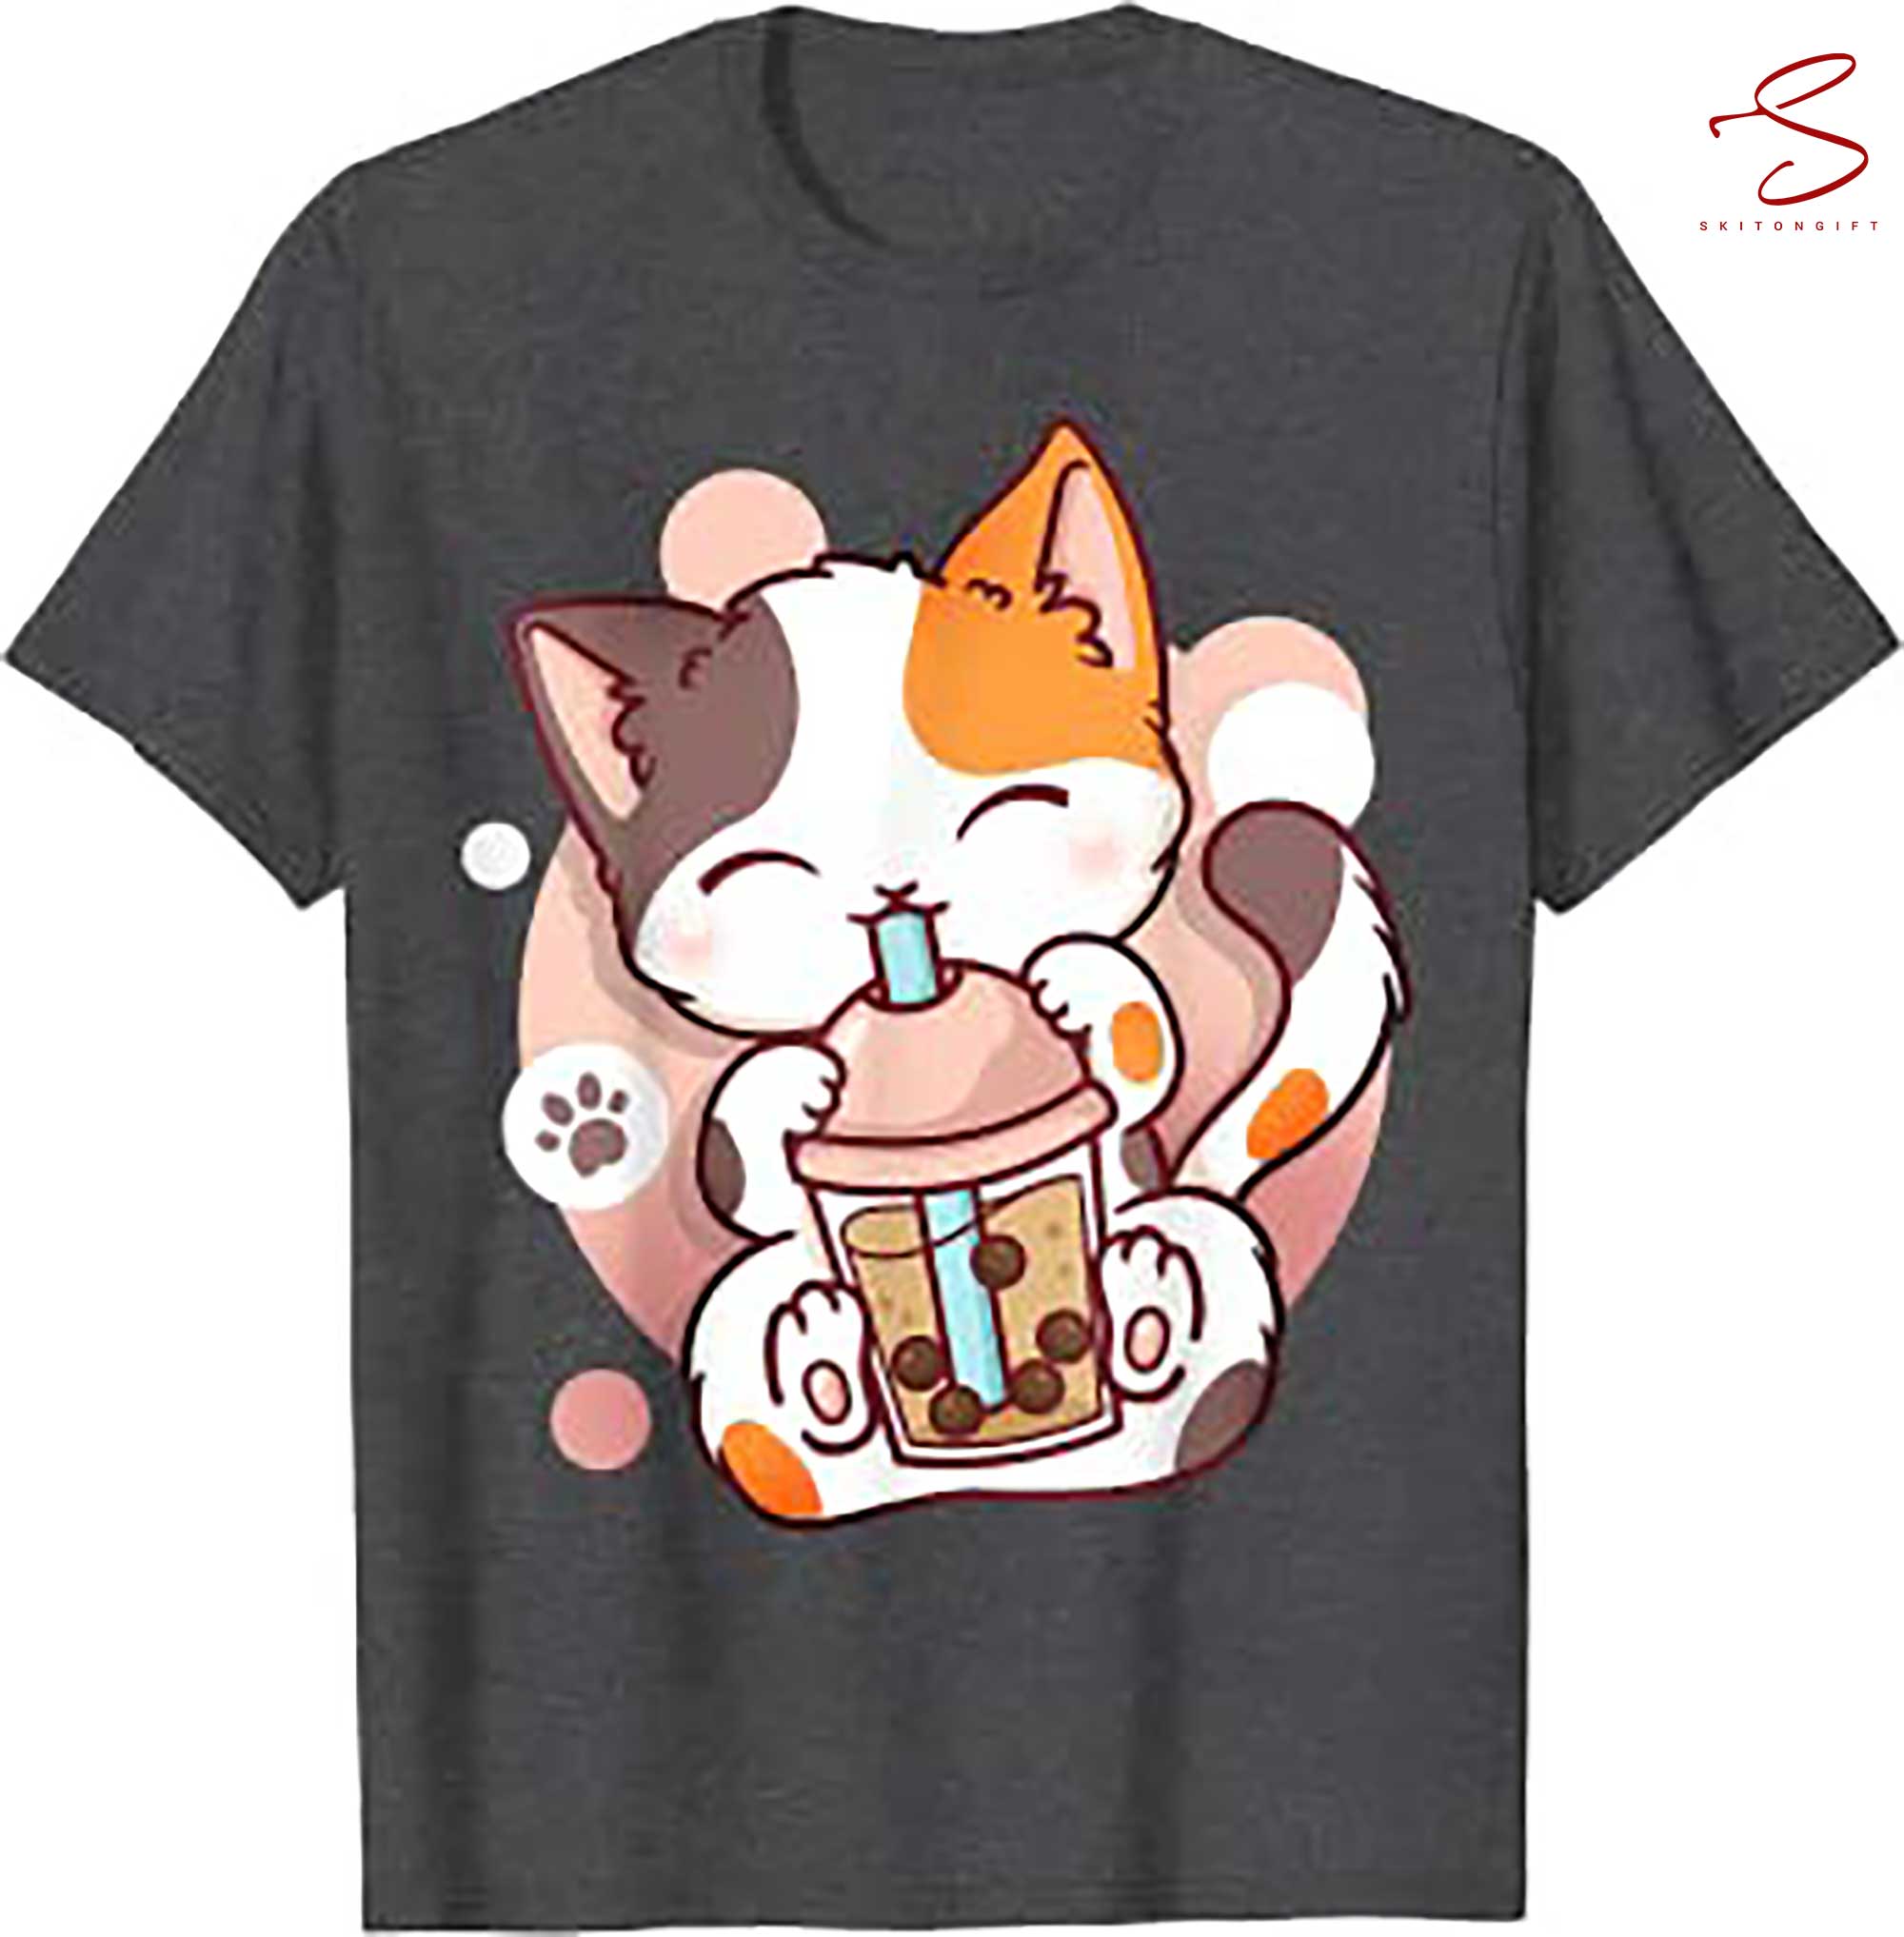 Skitongift Cat Boba Tea Bubble Tea Anime Kawaii Neko T Shirt, gifts for Dad Mom,Gifts for Him, Her, Gifts for Dad Mom